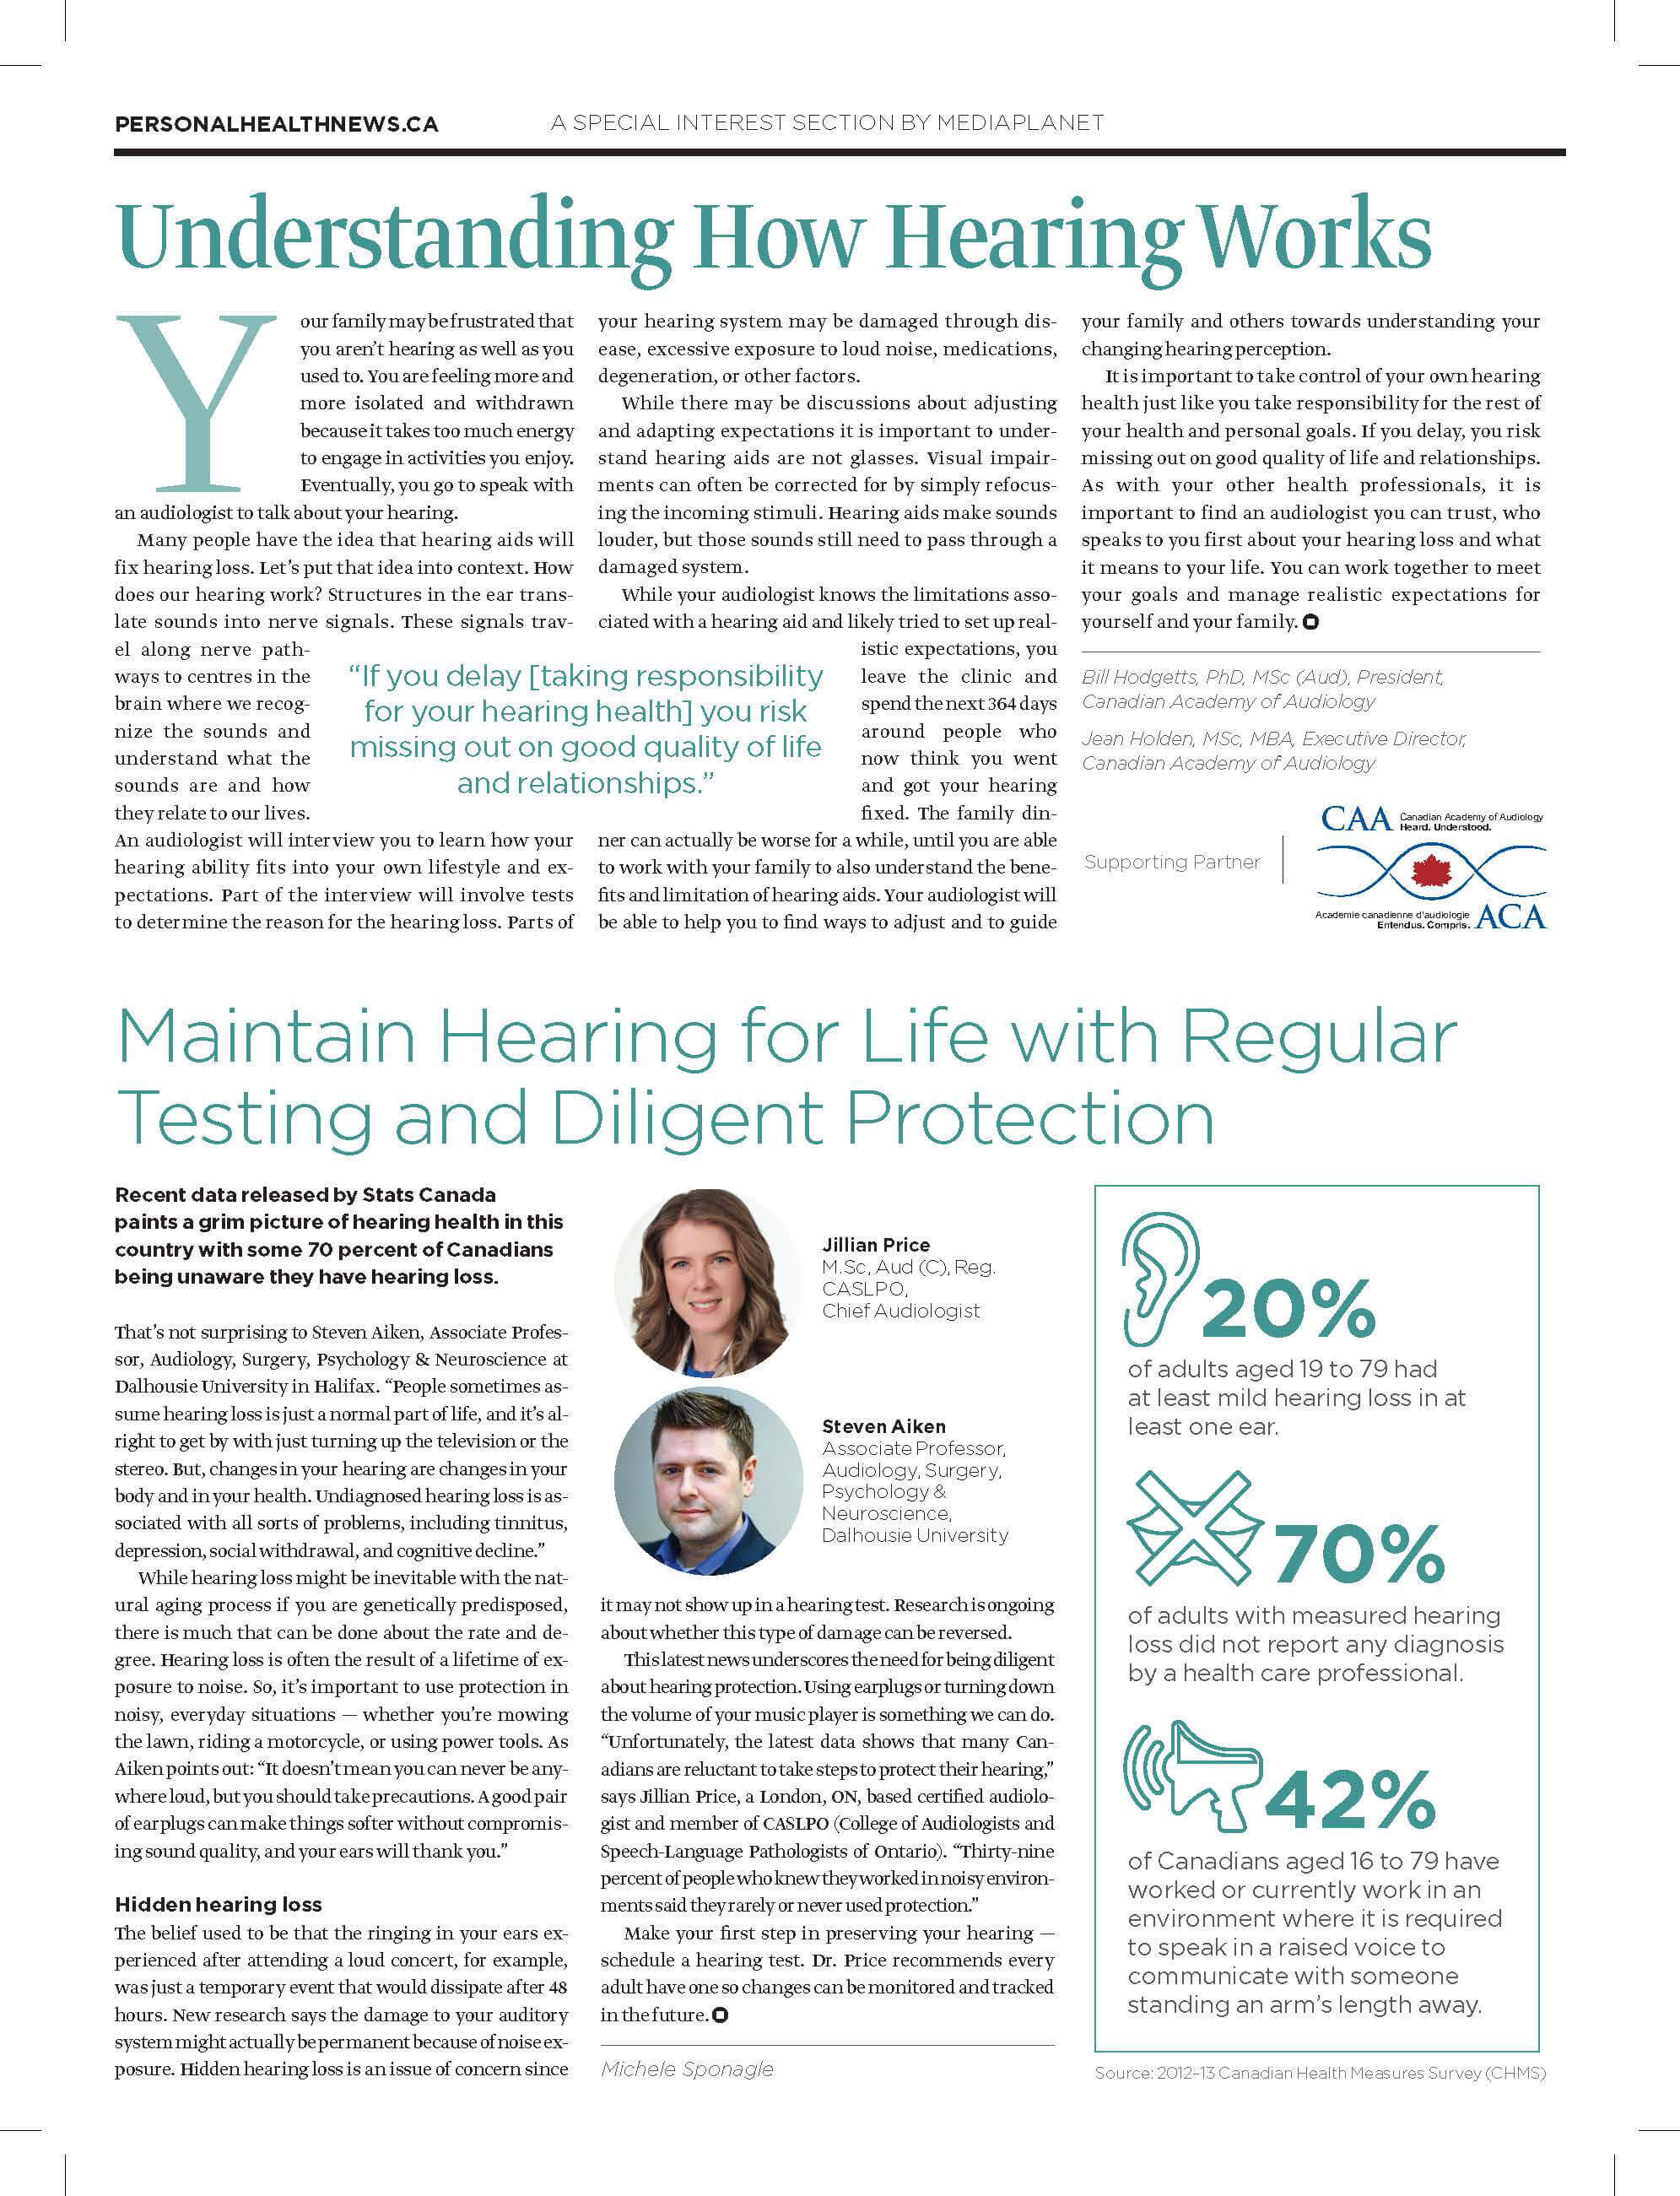 Maclean's: Understanding How Hearing Works - The National Campaign for ...